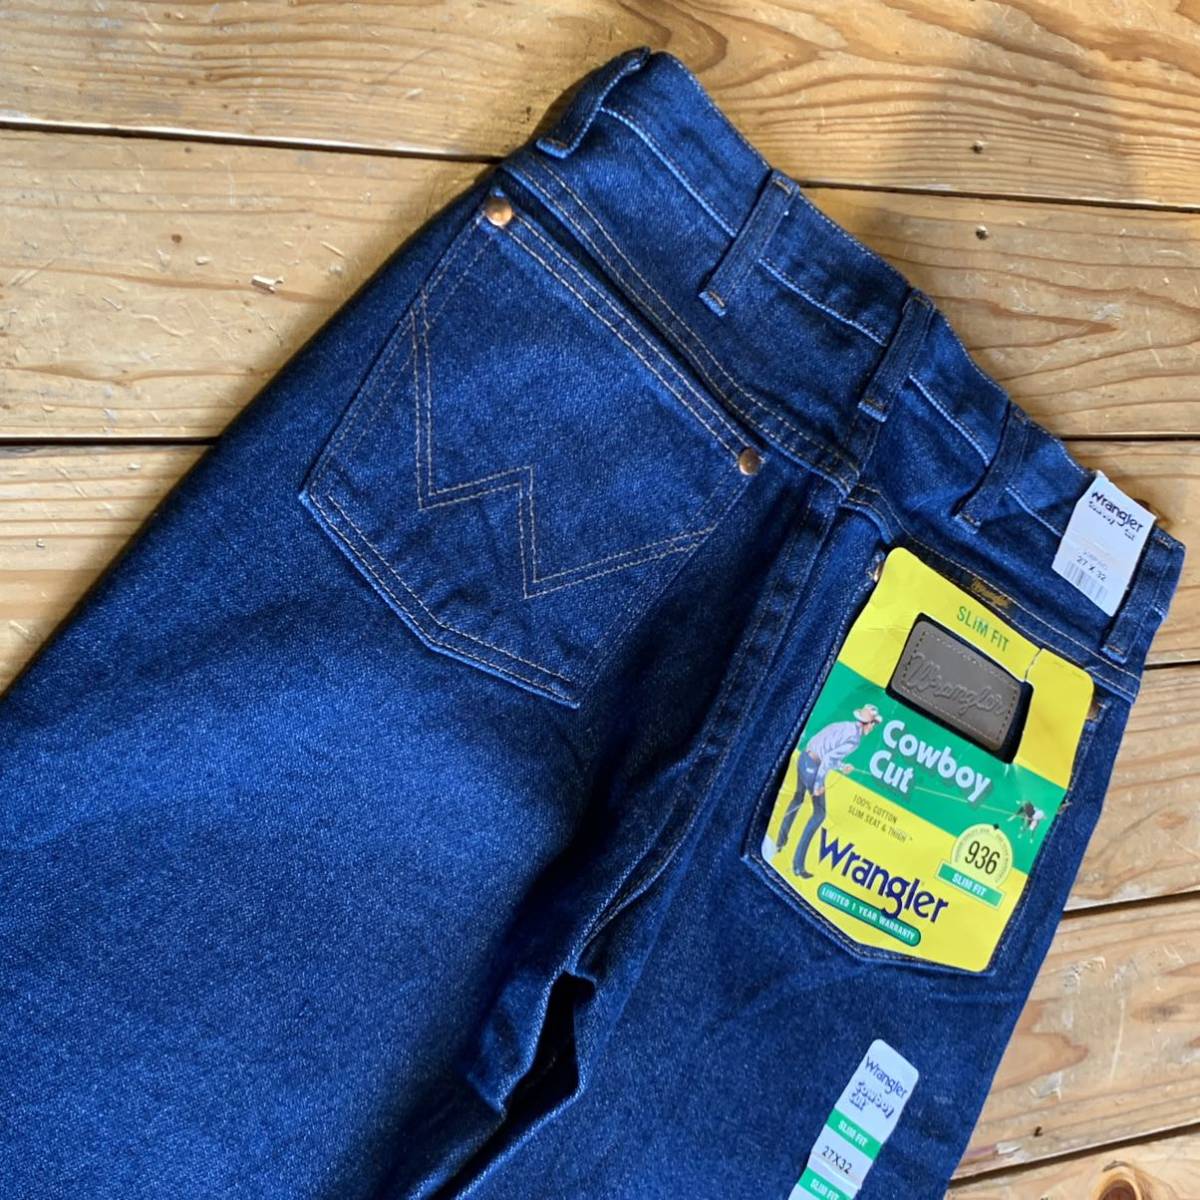  new goods Wrangler Wrangler Denim jeans men's W27L32 indigo American Casual outdoor old clothes America buying up tag attaching unused goods P1178